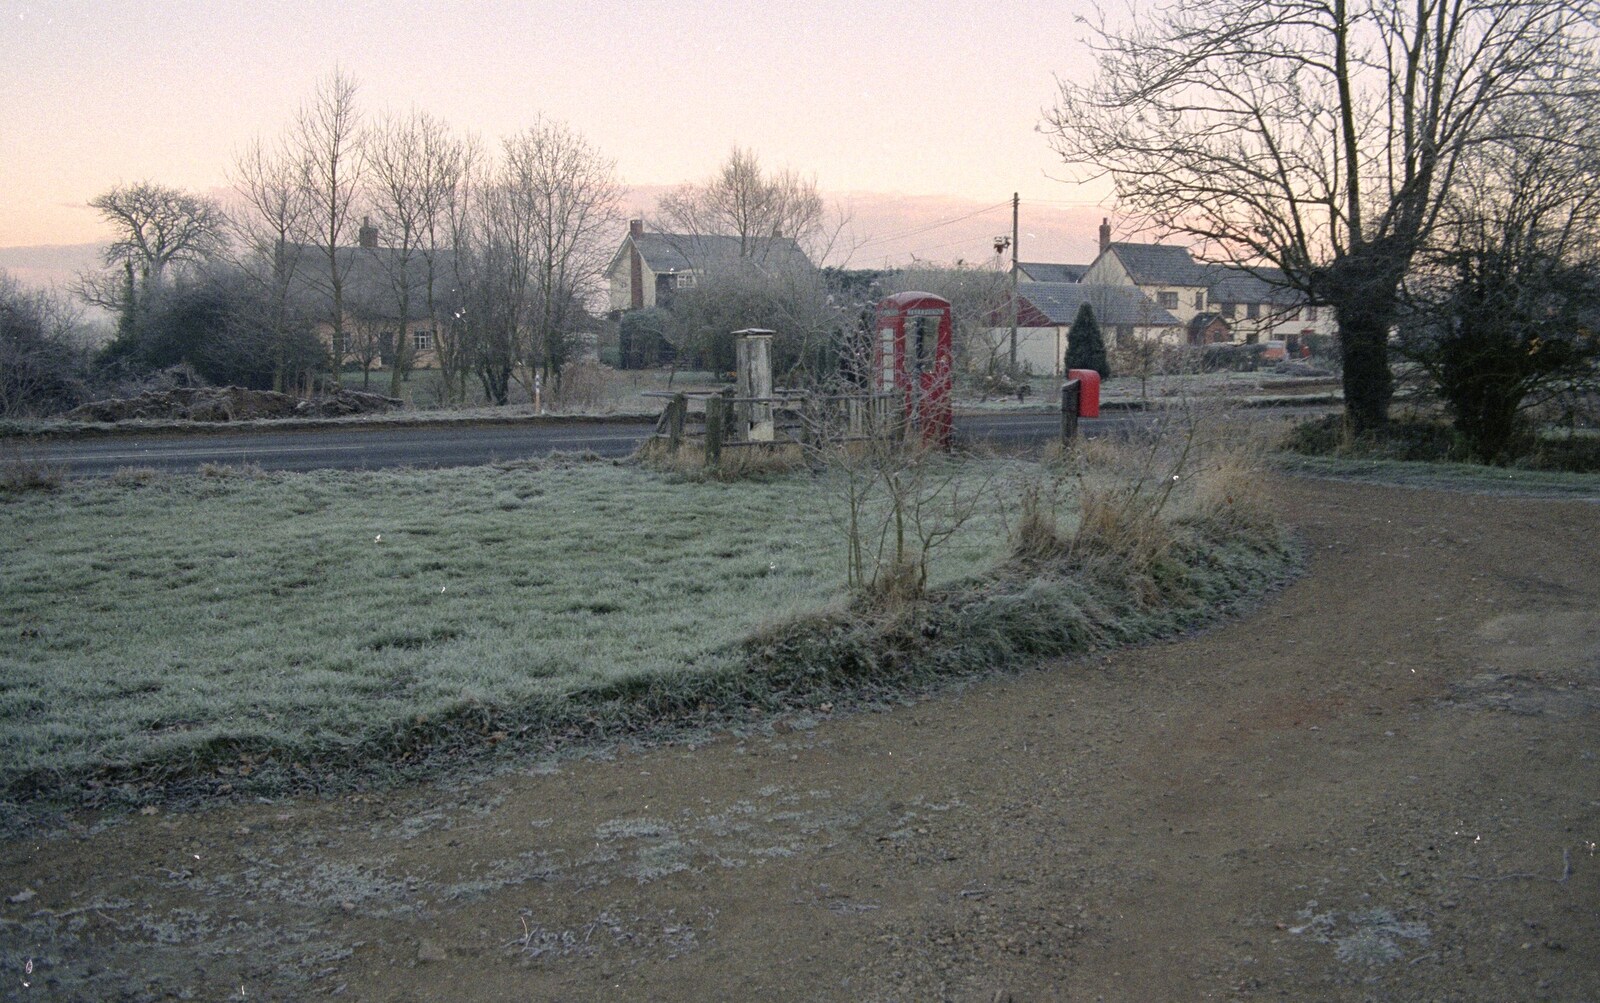 The K6 phonebox and the village pump from The Old Man Visits, and a Frosty Stuston, Suffolk - 8th December 1989